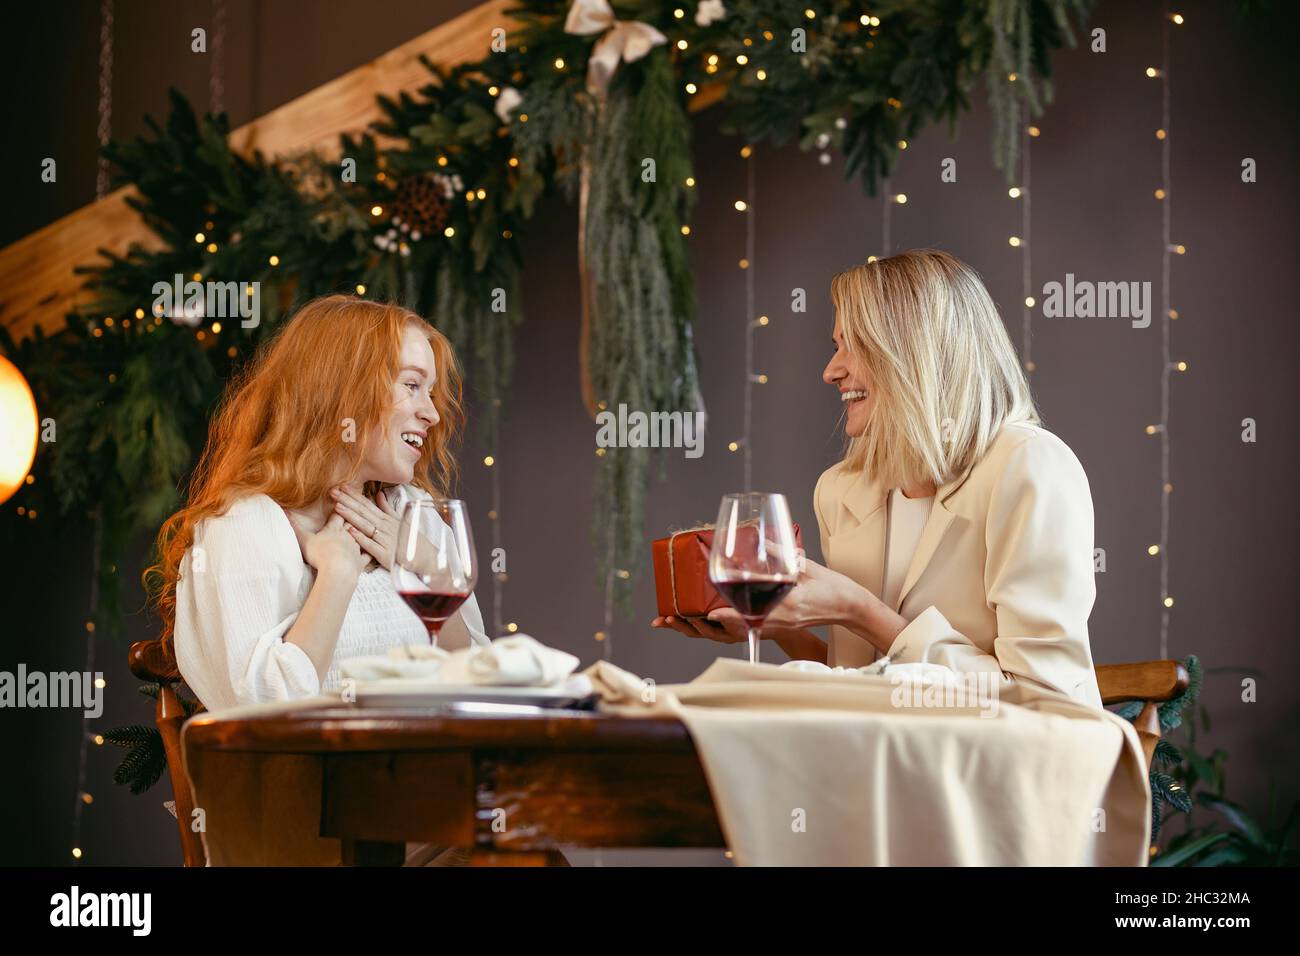 lesbian couple having dinner in a restaurant Girl giving a gift to her sweetheart Stock Photo